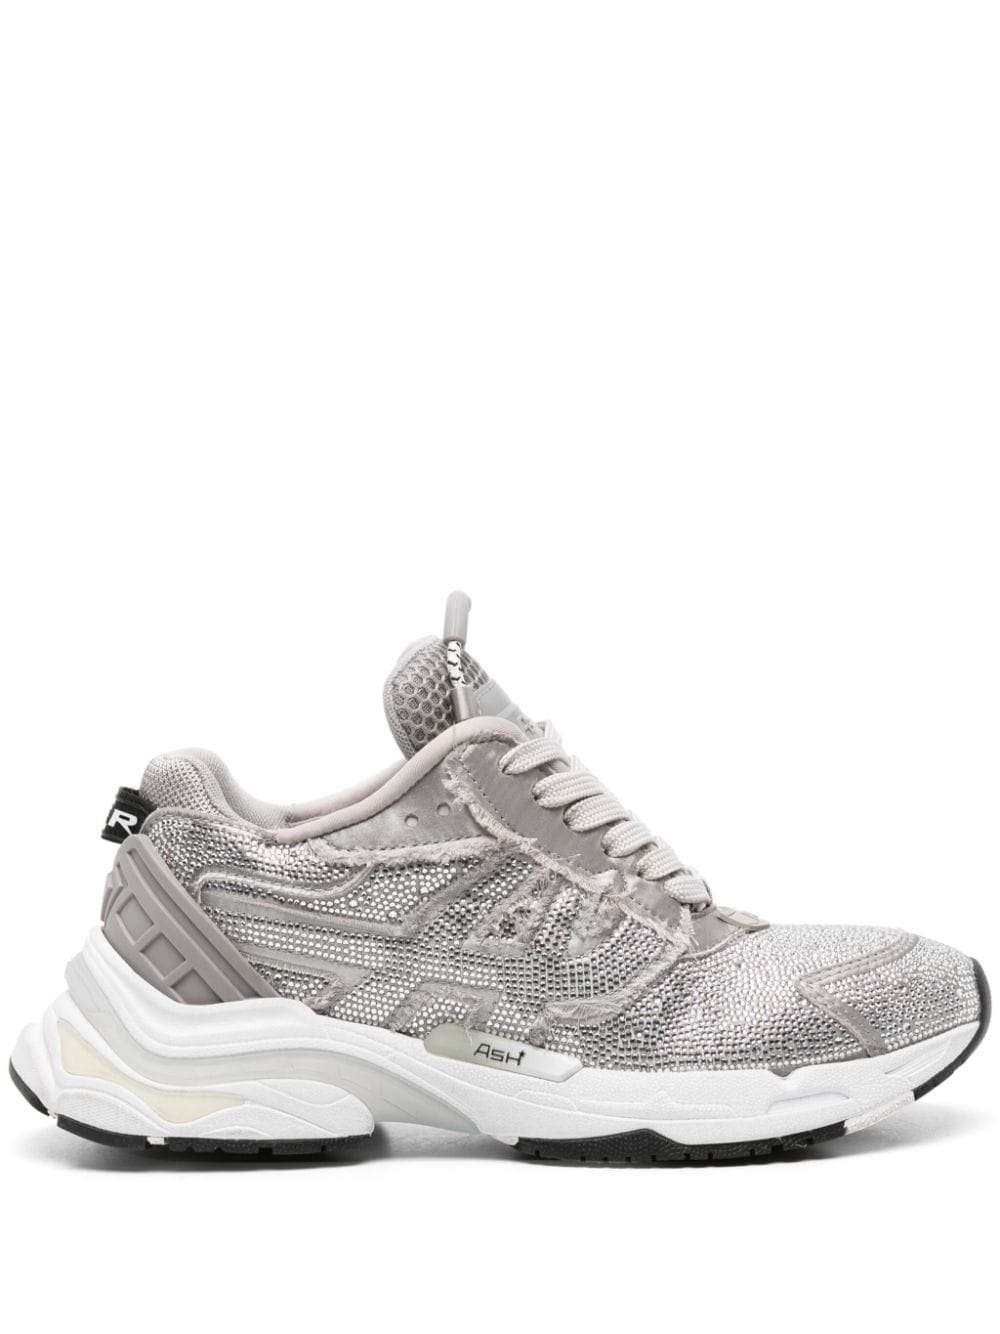 Ash ASH- Racer Strass Sneakers